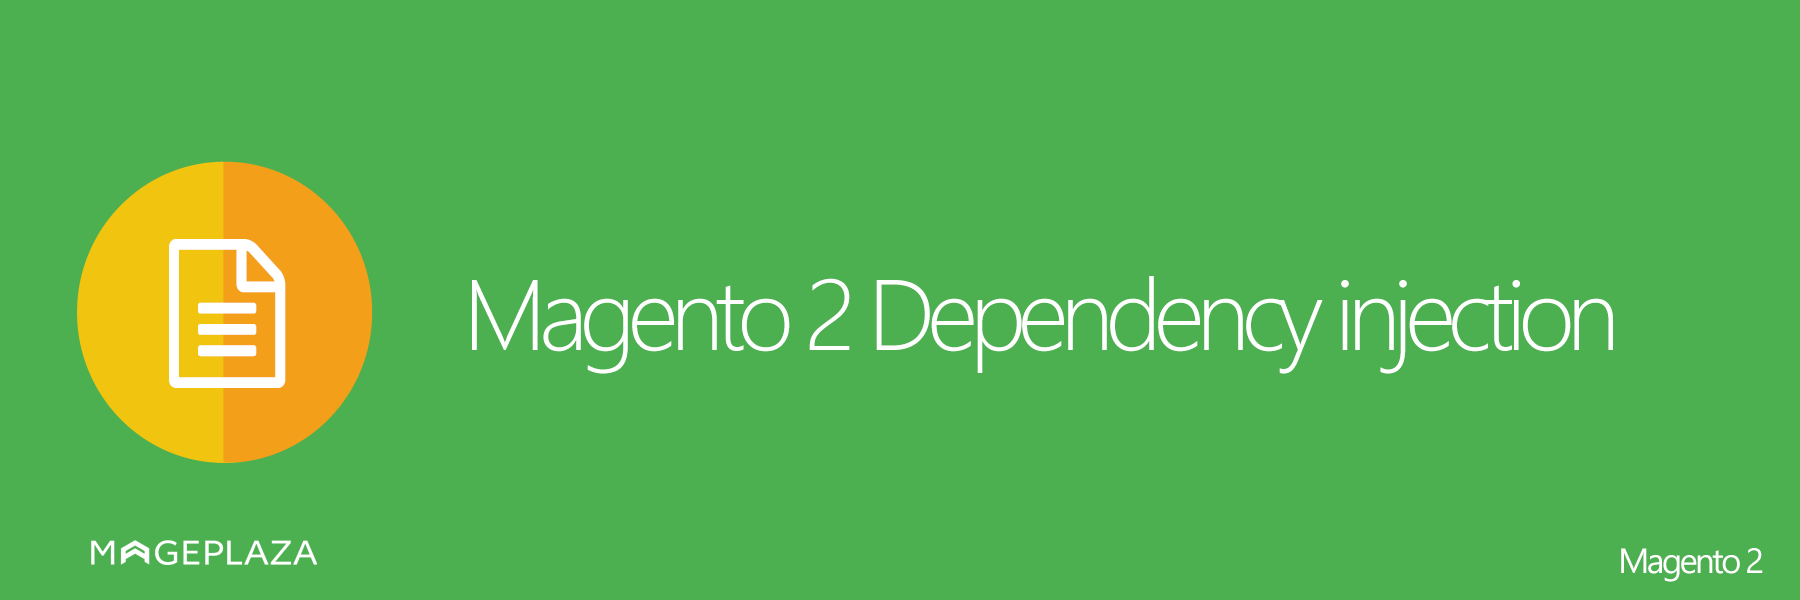 Magento 2 Dependency Injection and Relevant Information